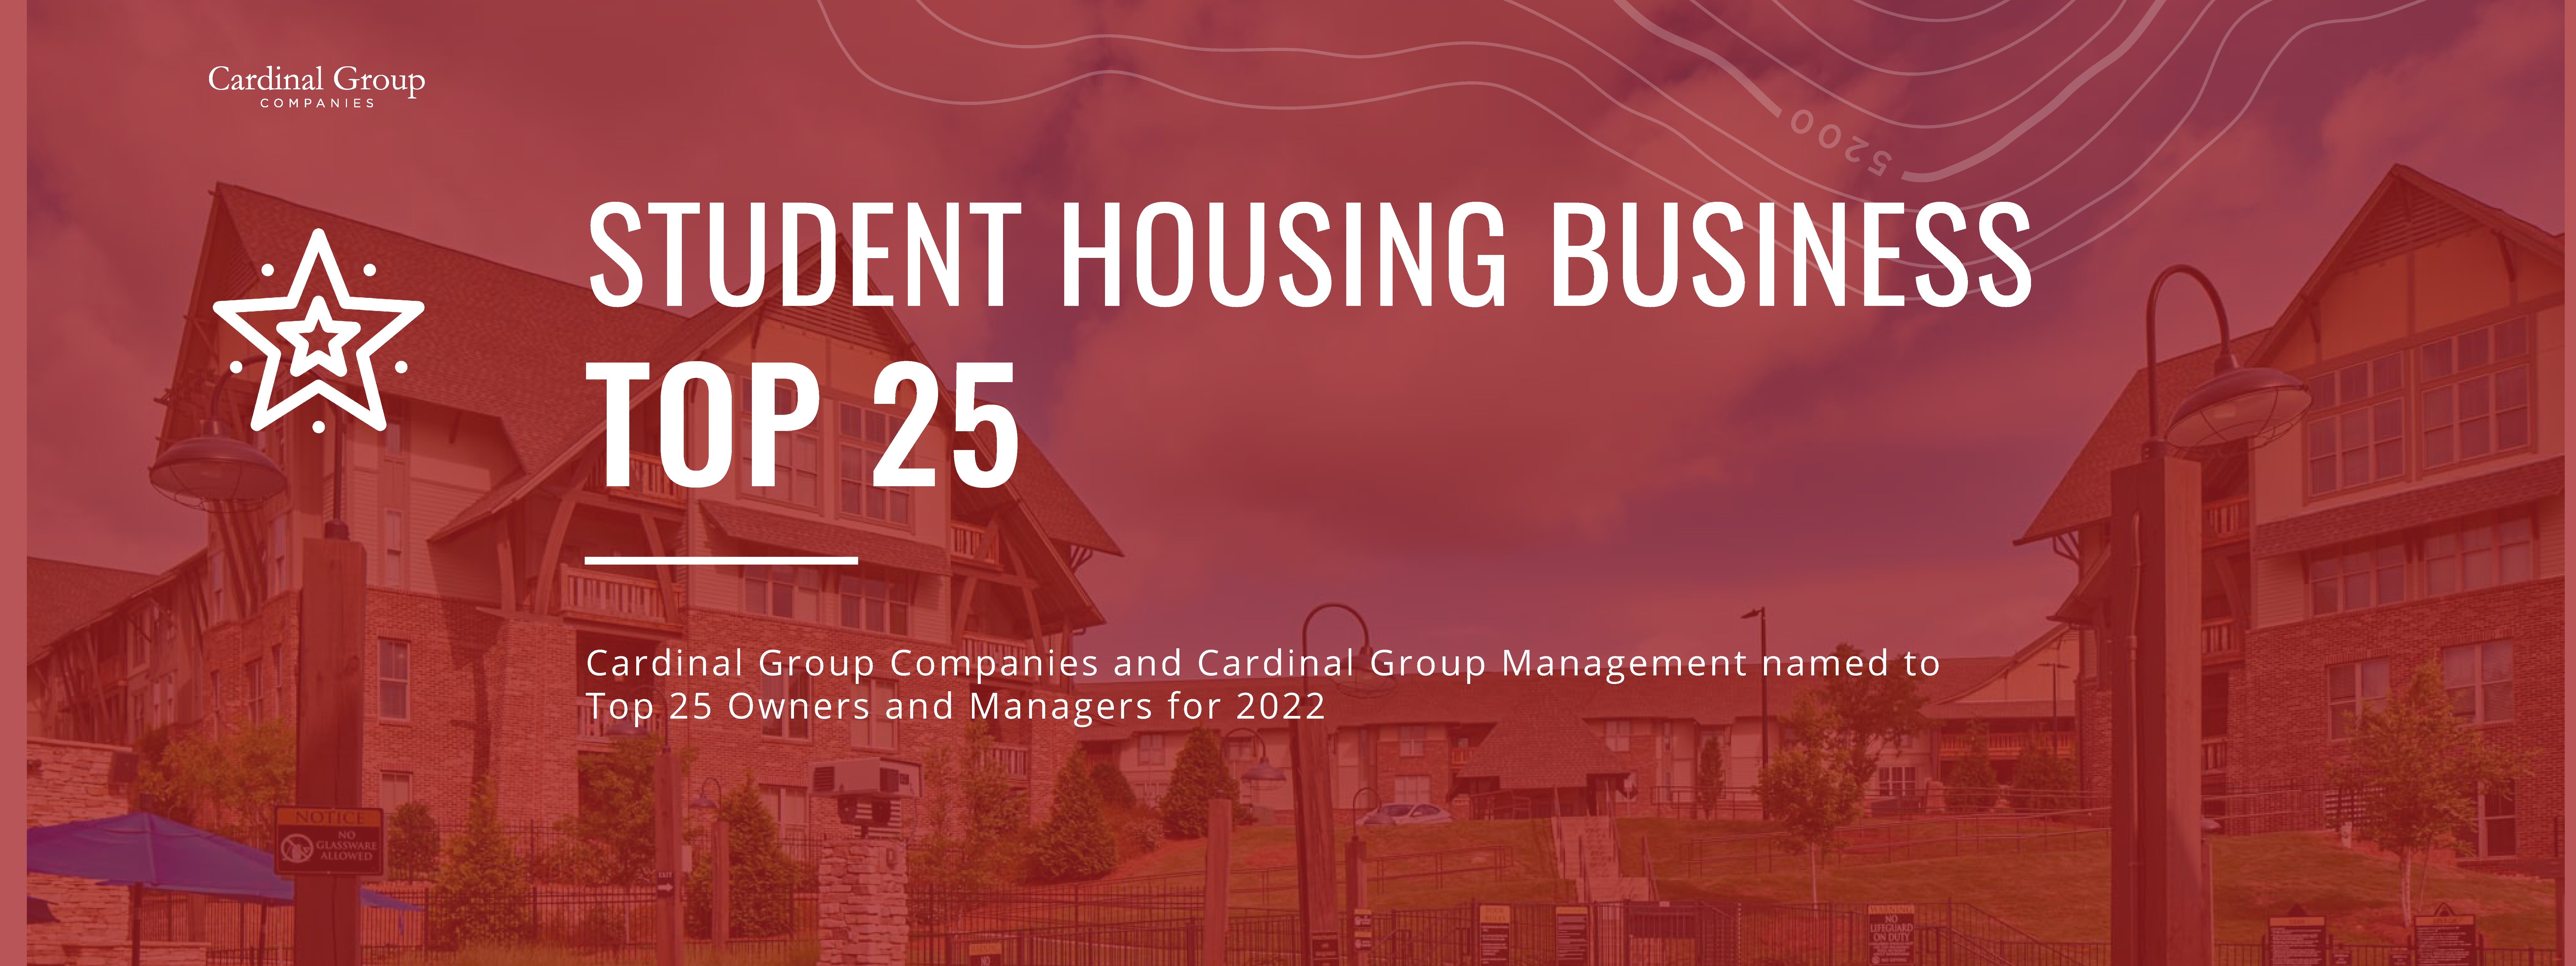 Cardinal Group Management ​Ranks in Top 100 of ORA Power Rankings for 2022  of Student Housing Communities - Cardinal Group